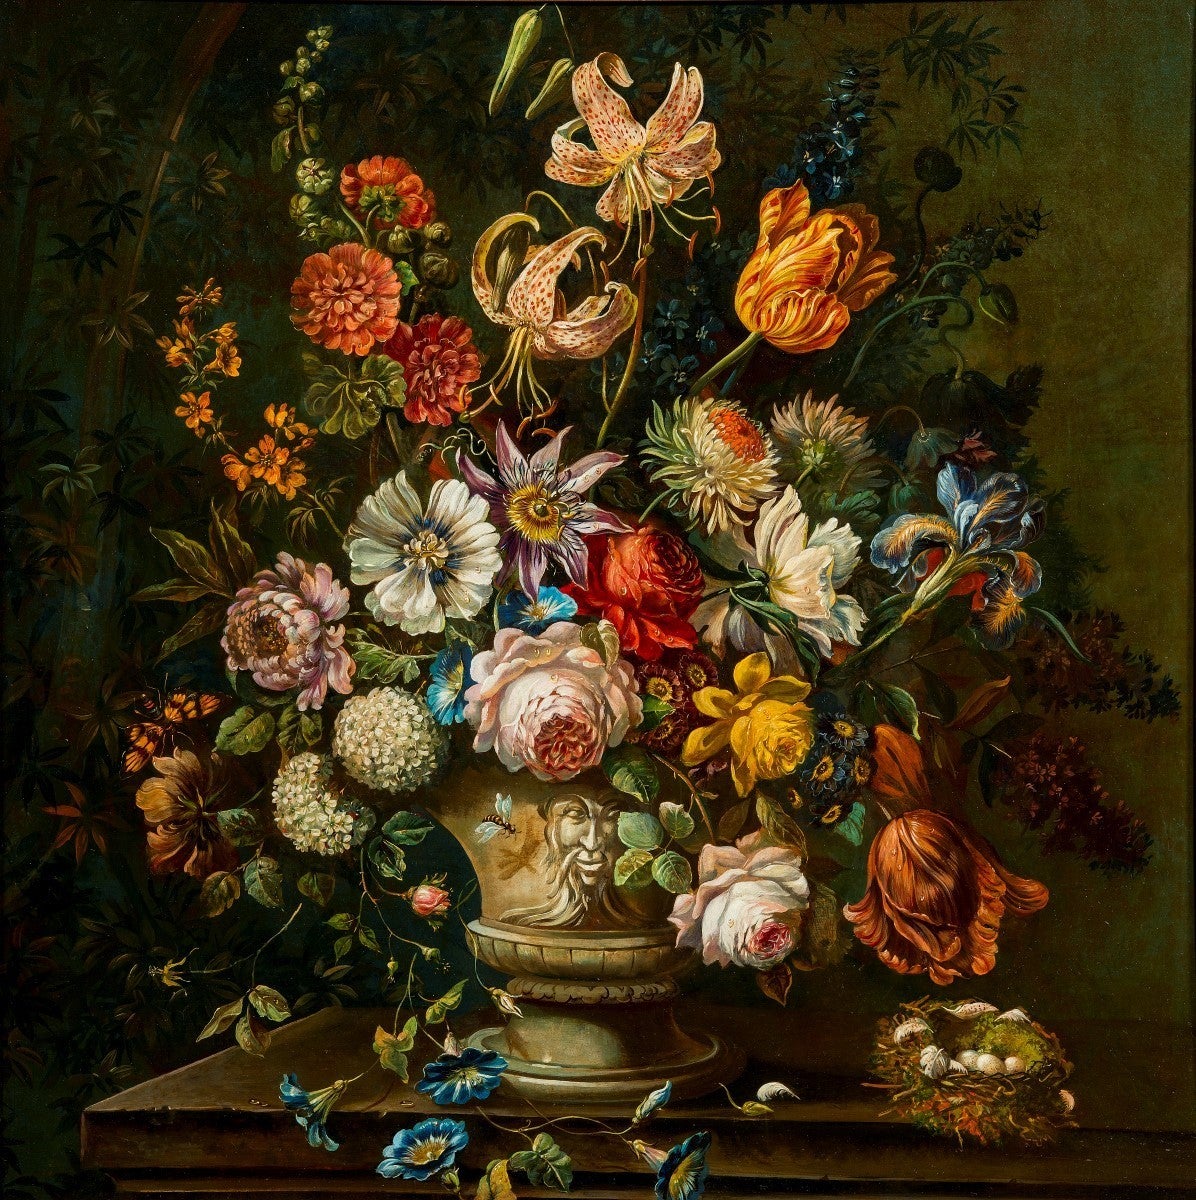 Late 19th century Still Life beautifully executed with vibrant colours of flowers and insects. In the original gilt-wood frame. Dutch or Flemish School.